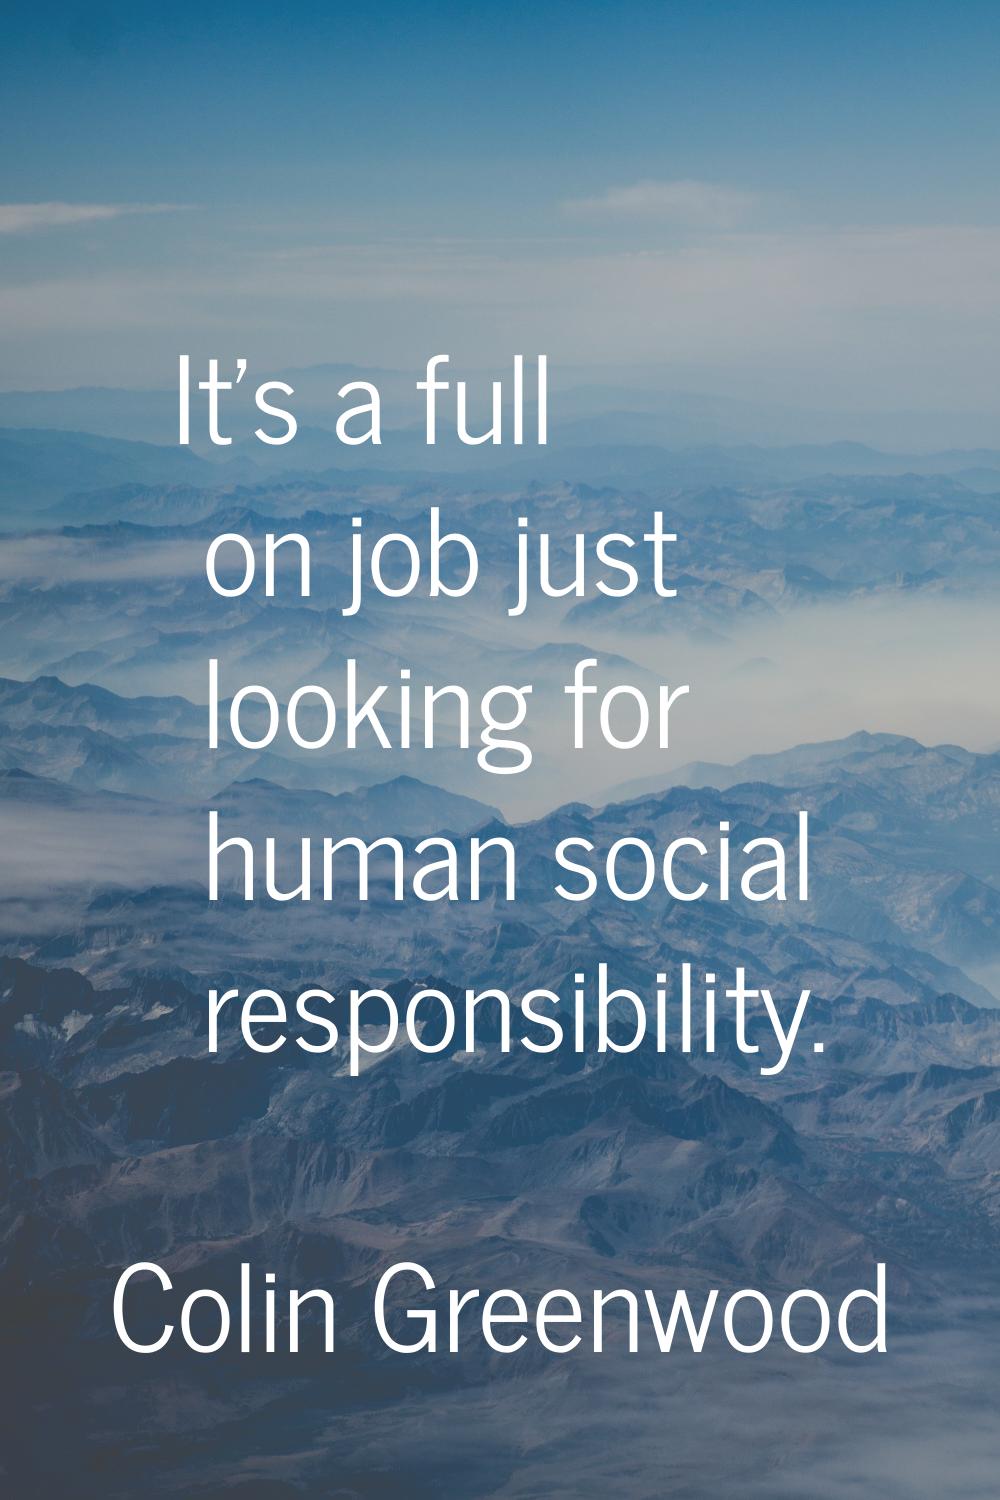 It's a full on job just looking for human social responsibility.